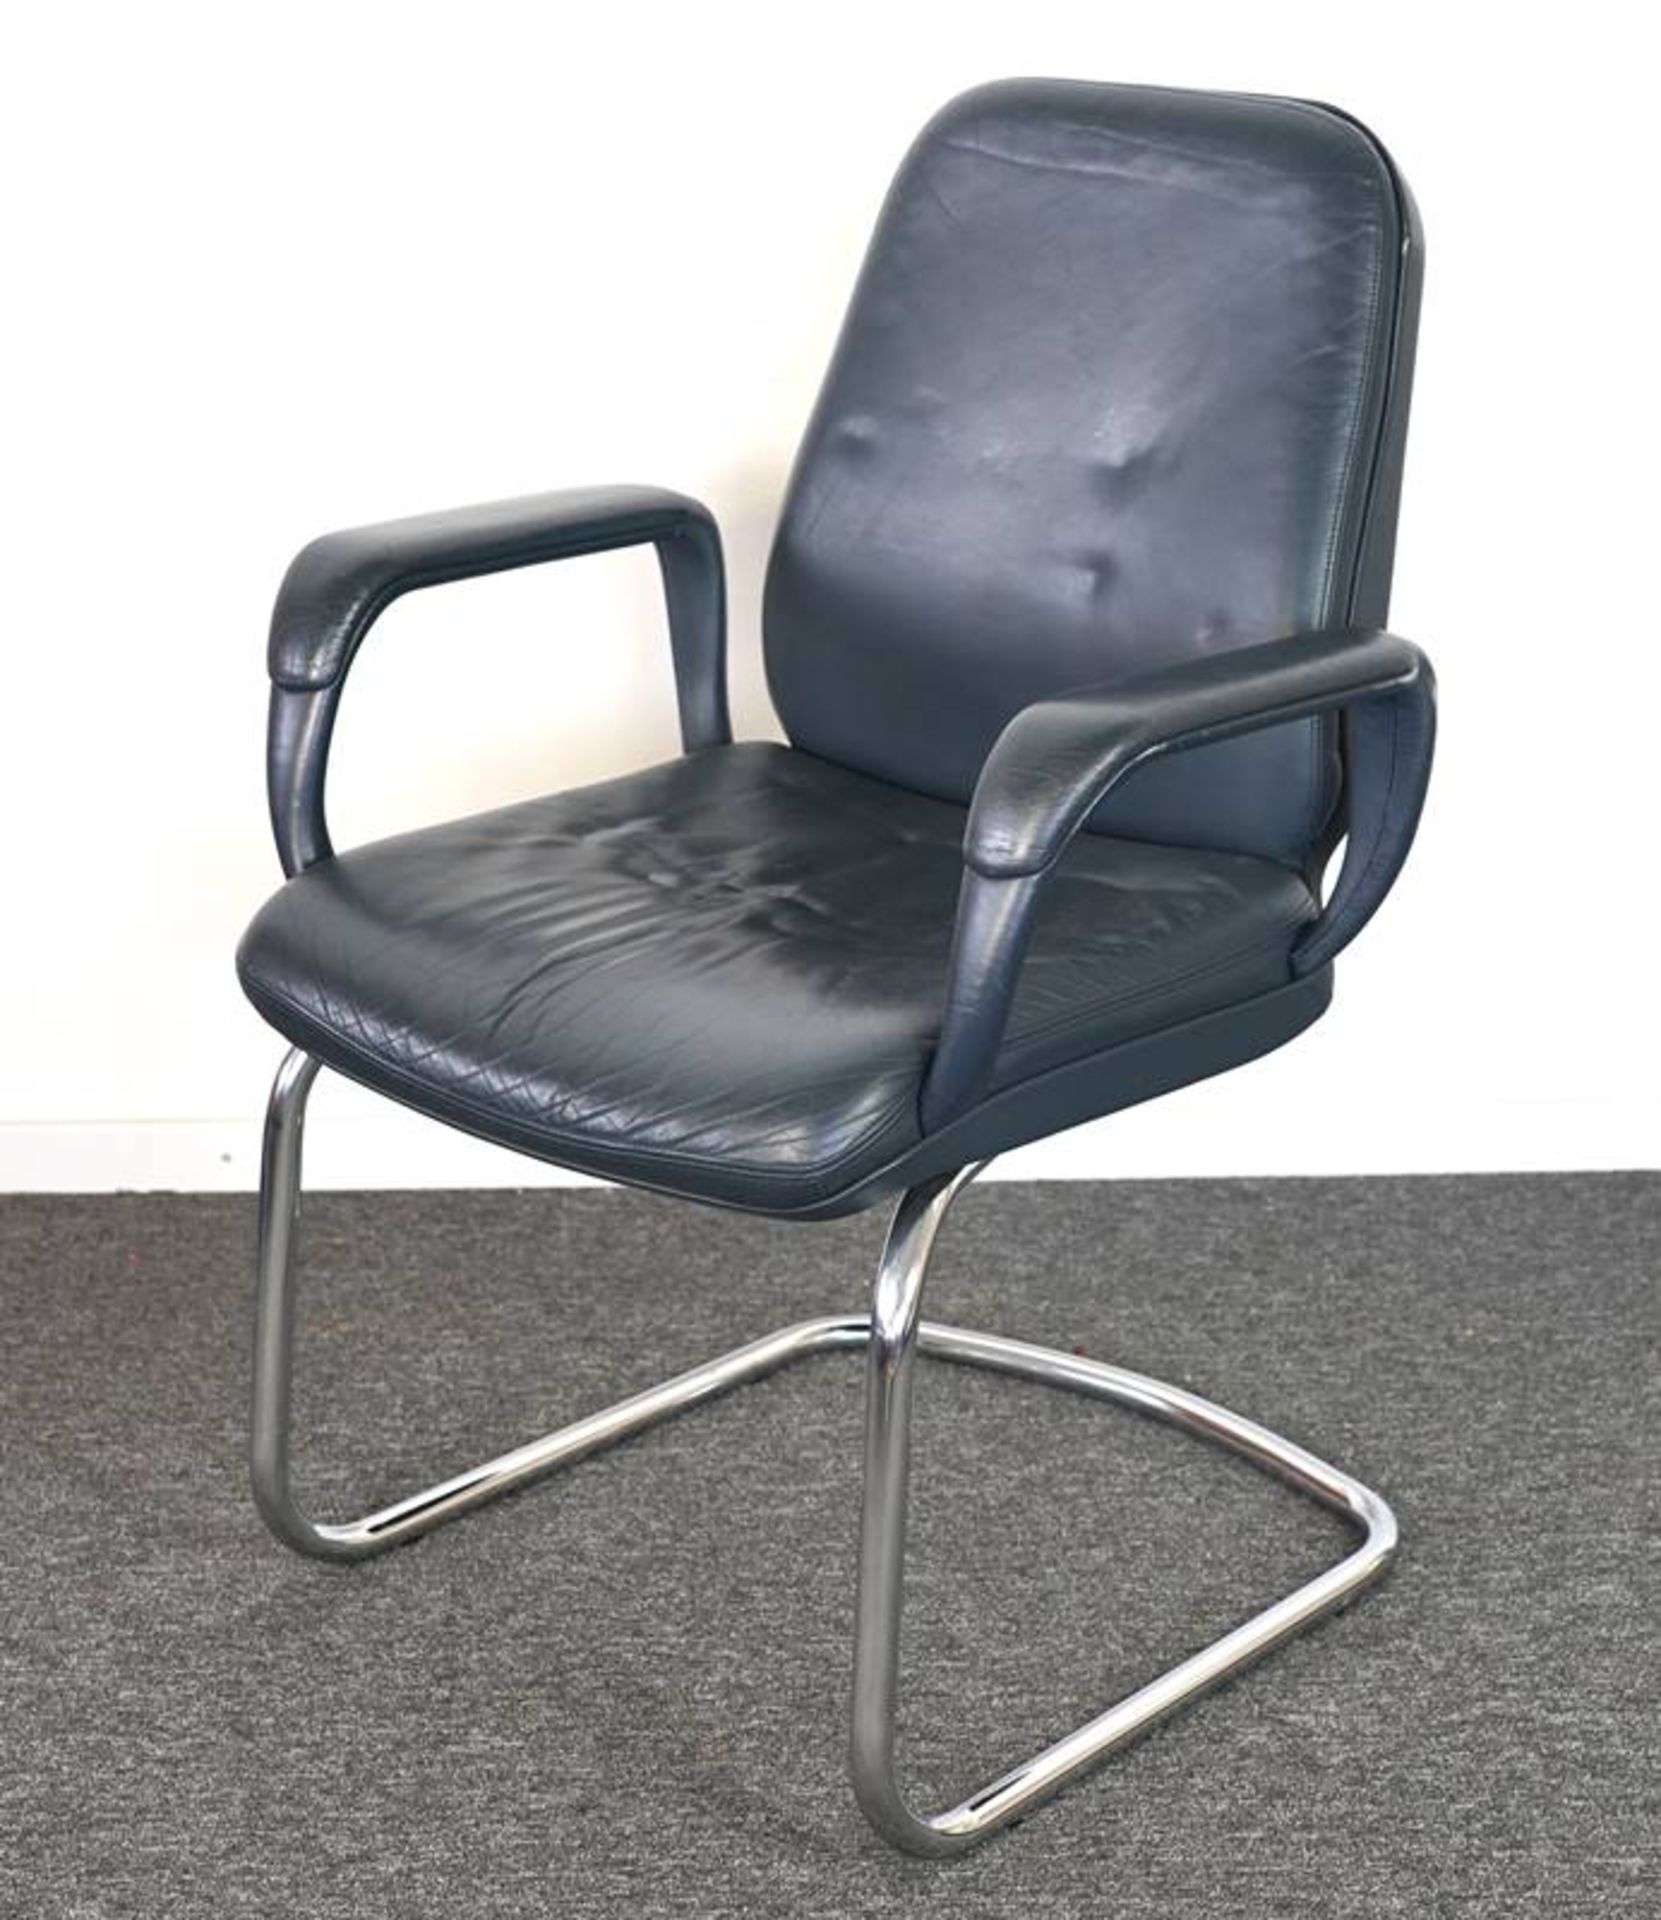 Design cantilever chair